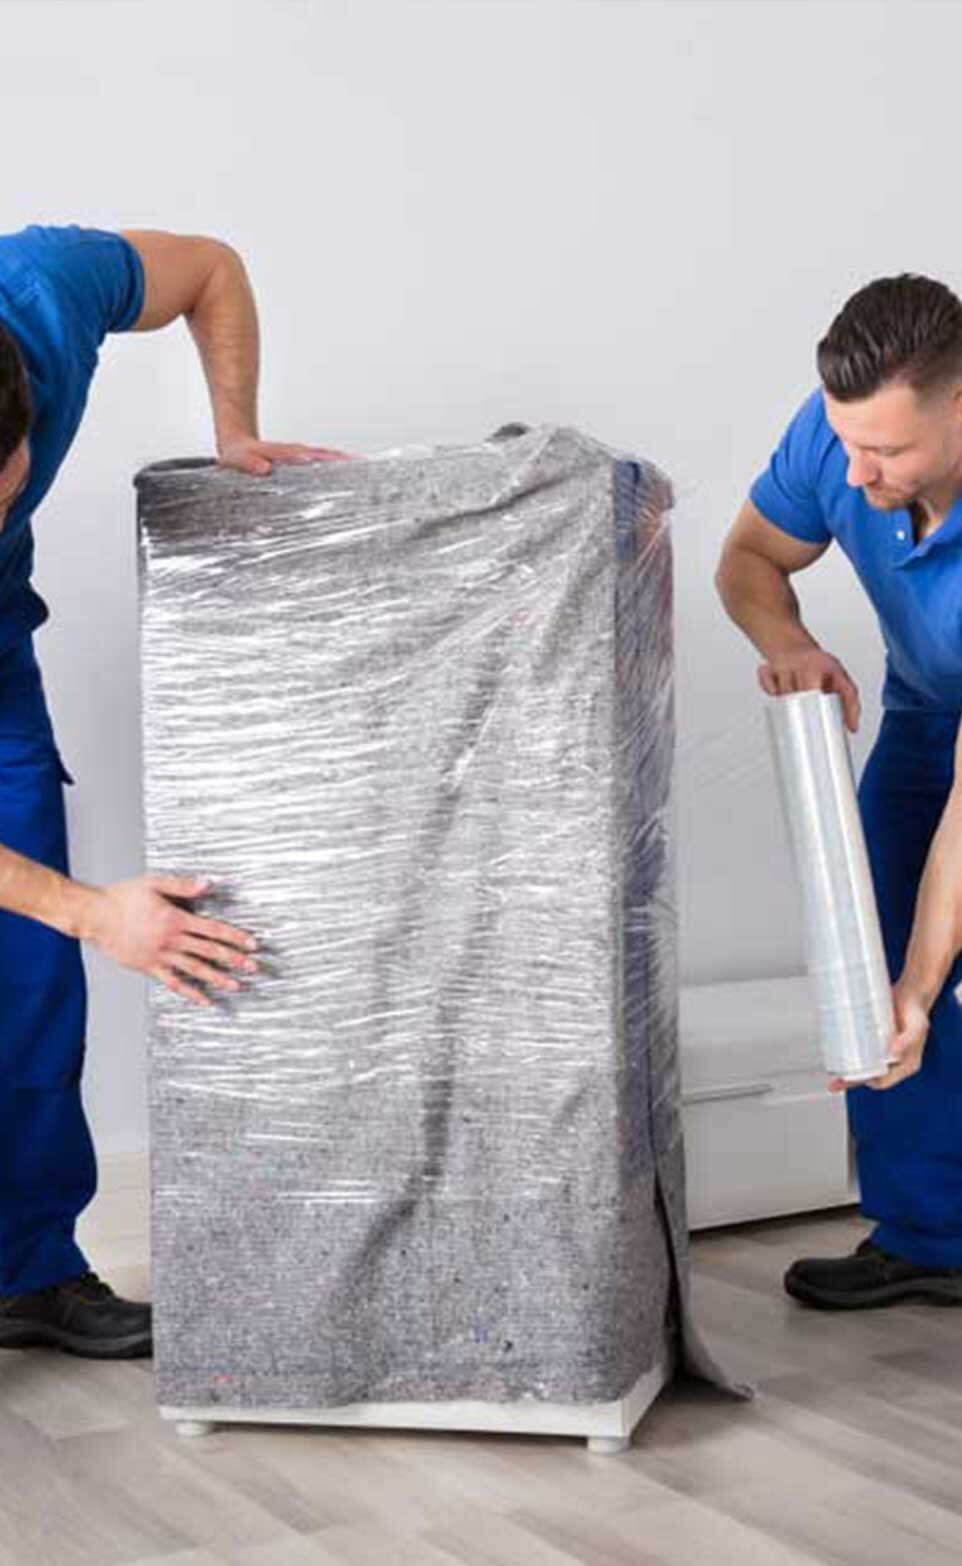 Professional movers — Removal Services in Gladstone, QL